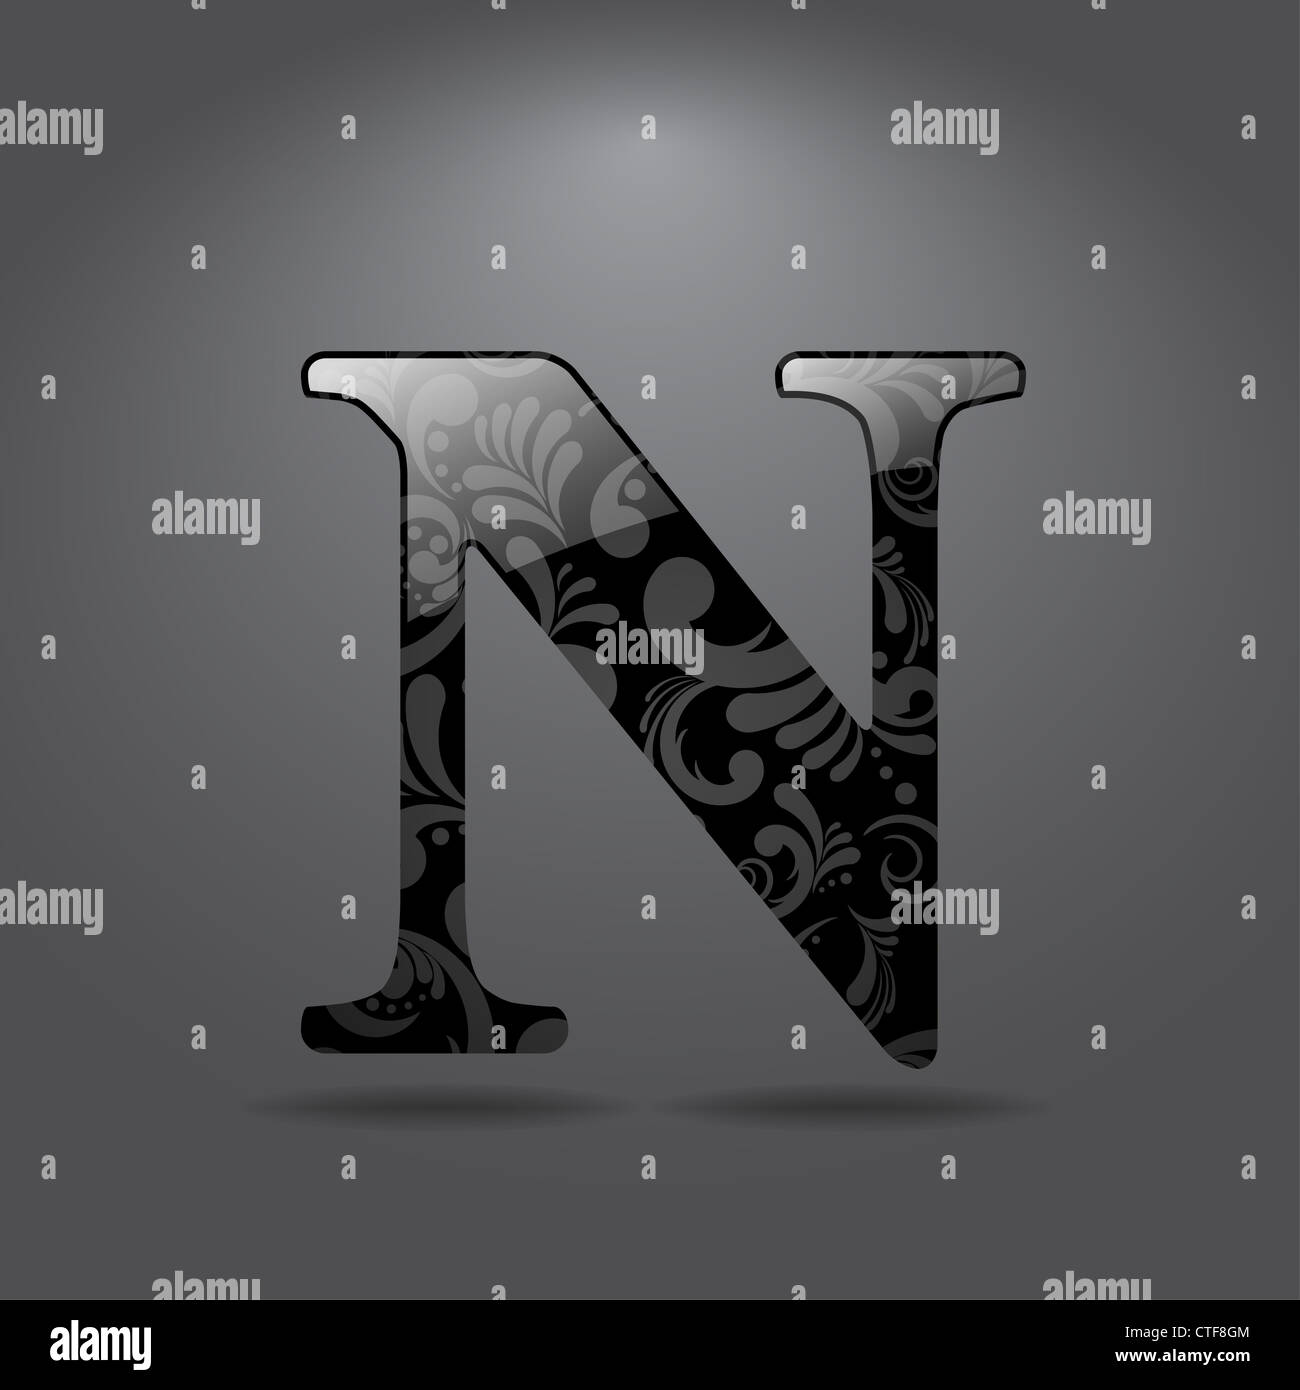 Glossy letter N isolated on gray background Stock Photo